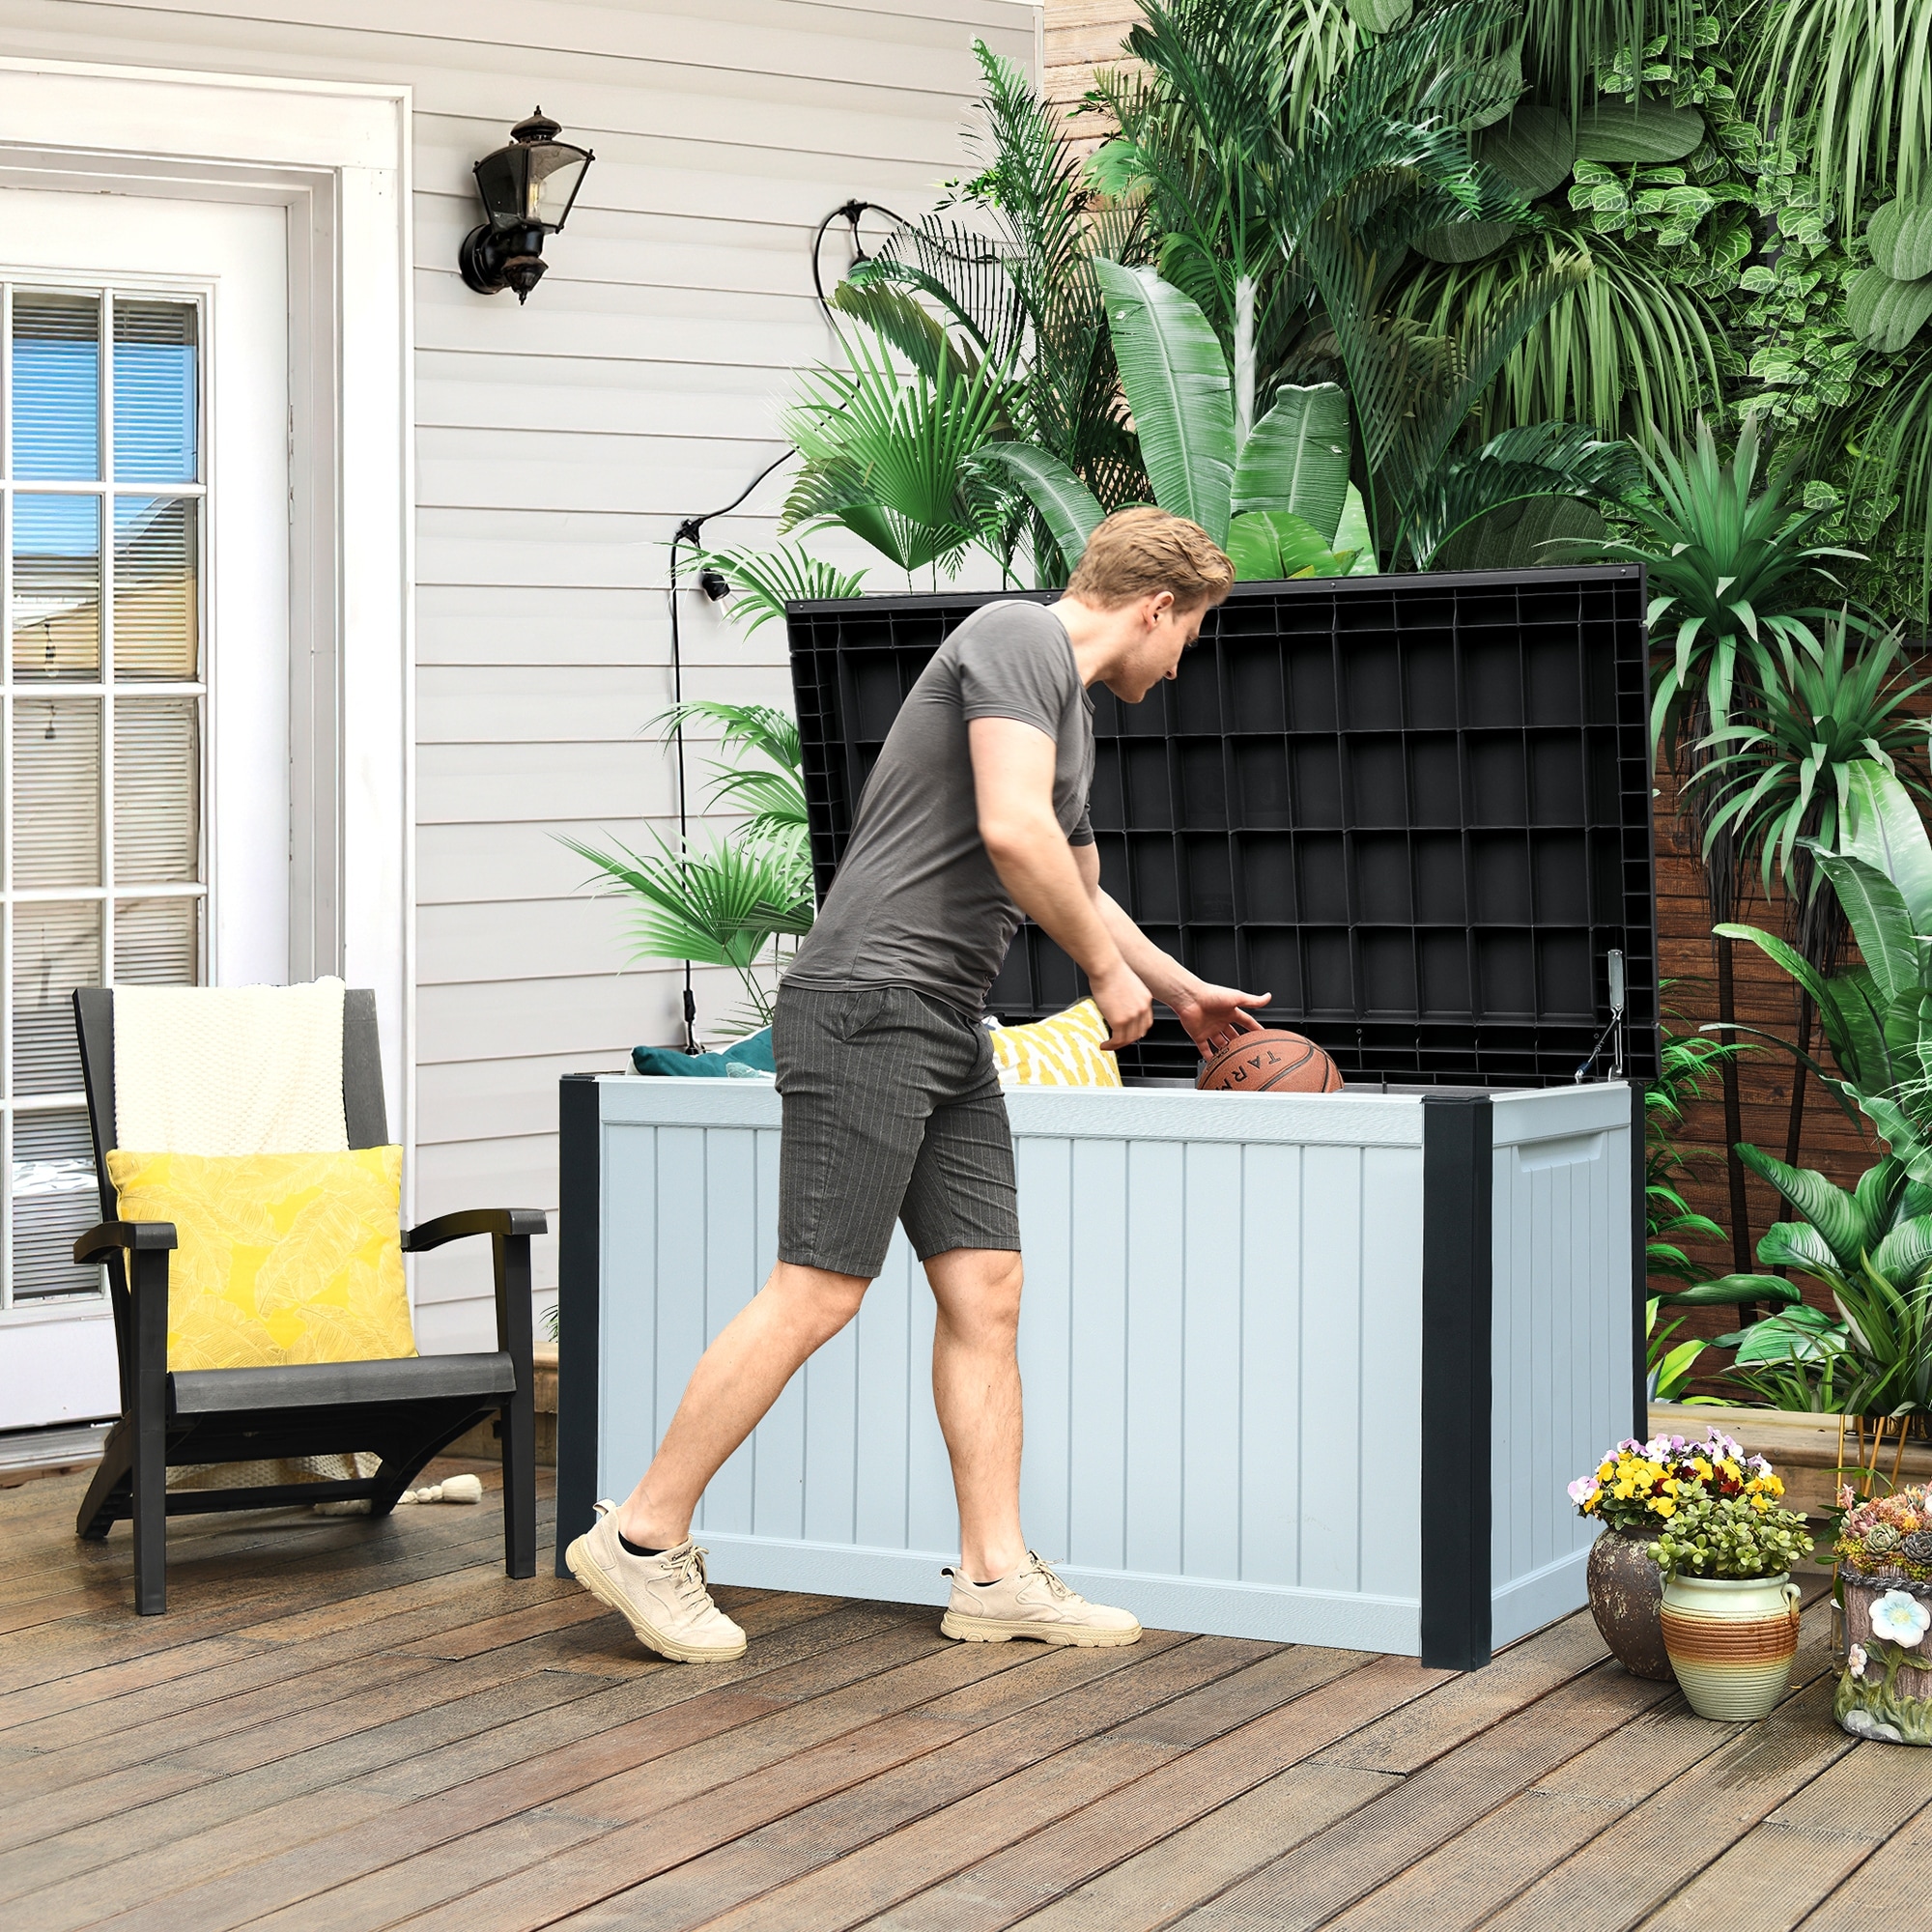 https://ak1.ostkcdn.com/images/products/is/images/direct/bc1634809aea7cc063618ac3e290ad44a4211717/230-Gallon-Outdoor-Storage-Waterproof-Deck-Box.jpg